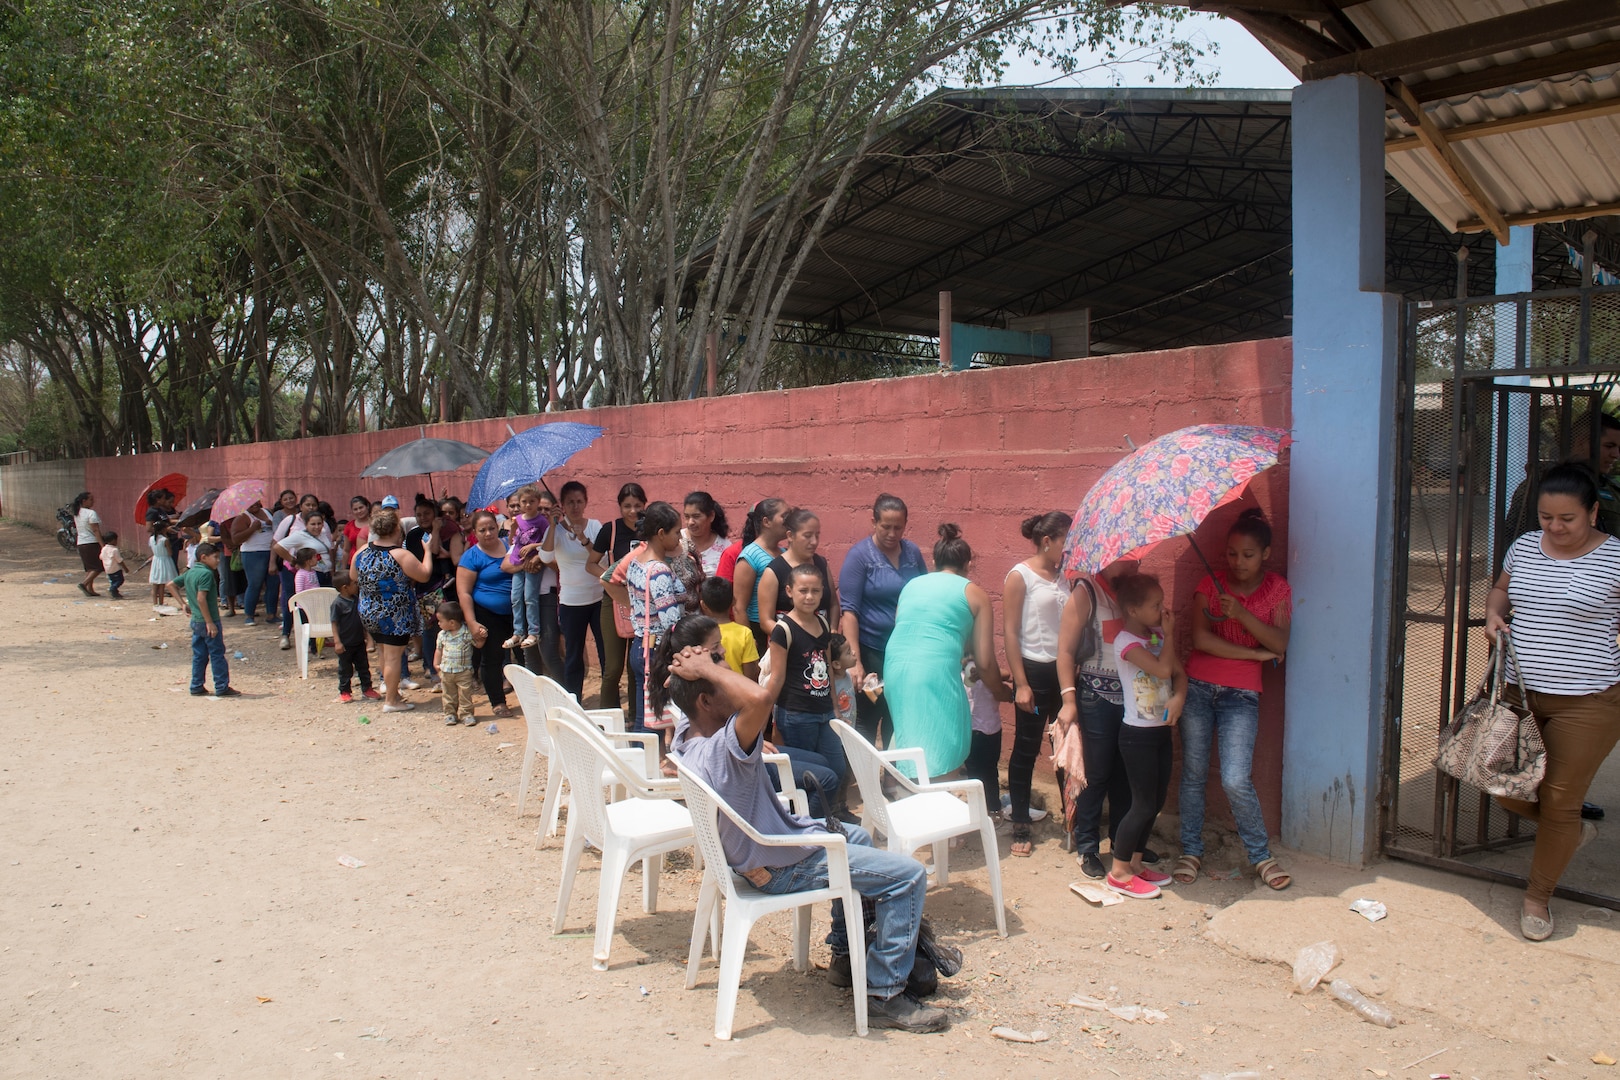 Honduran citizens stand in line to receive medical care during a Medical Readiness Training Exercise (MEDRETE), May 10, 2019, in El Paraiso, Honduras. Members of JTF-B partnered with the Honduran Military and Ministry of Health to provide health care services for more than 1,300 Honduran citizens; reaching a third of the citizens in the towns of Argelia, Santa Maria and Las Dificultades in the El Paraiso Department. The goal of the mission was to provide the medical staff training in their areas of expertise as well as strengthen partnerships with the Honduran allies. (U.S. Air Force photo by Staff Sgt. Eric Summers Jr.)